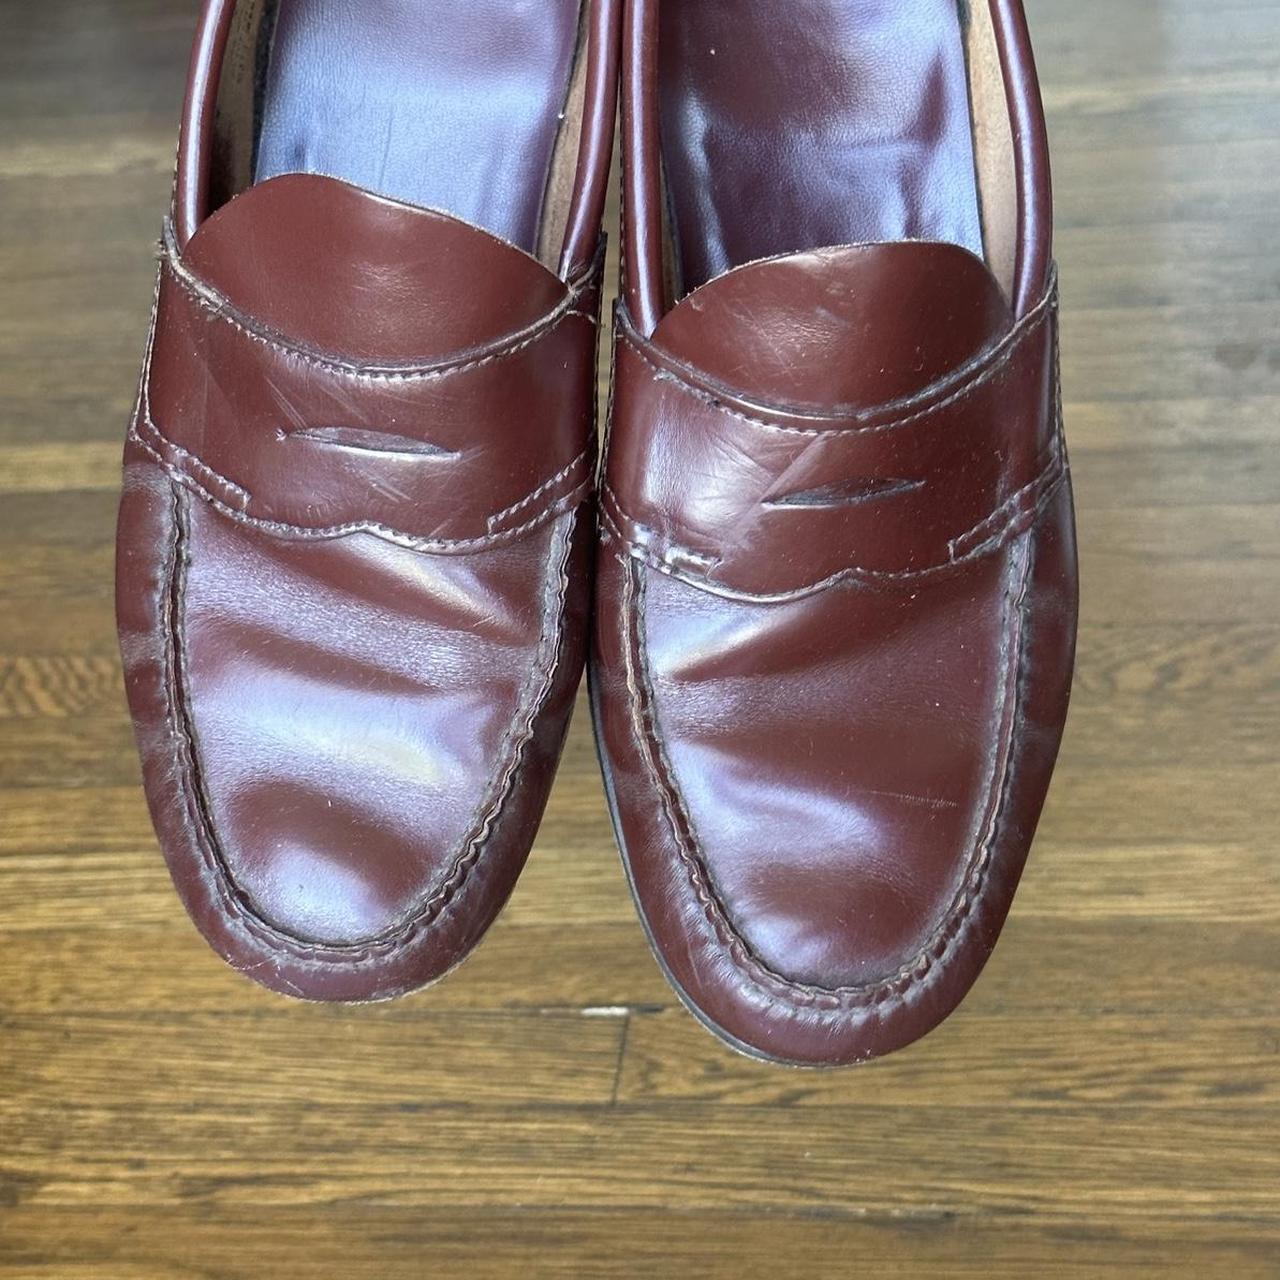 BURGUNDY LOAFERS Men’s 9 Worn with love! These are... - Depop